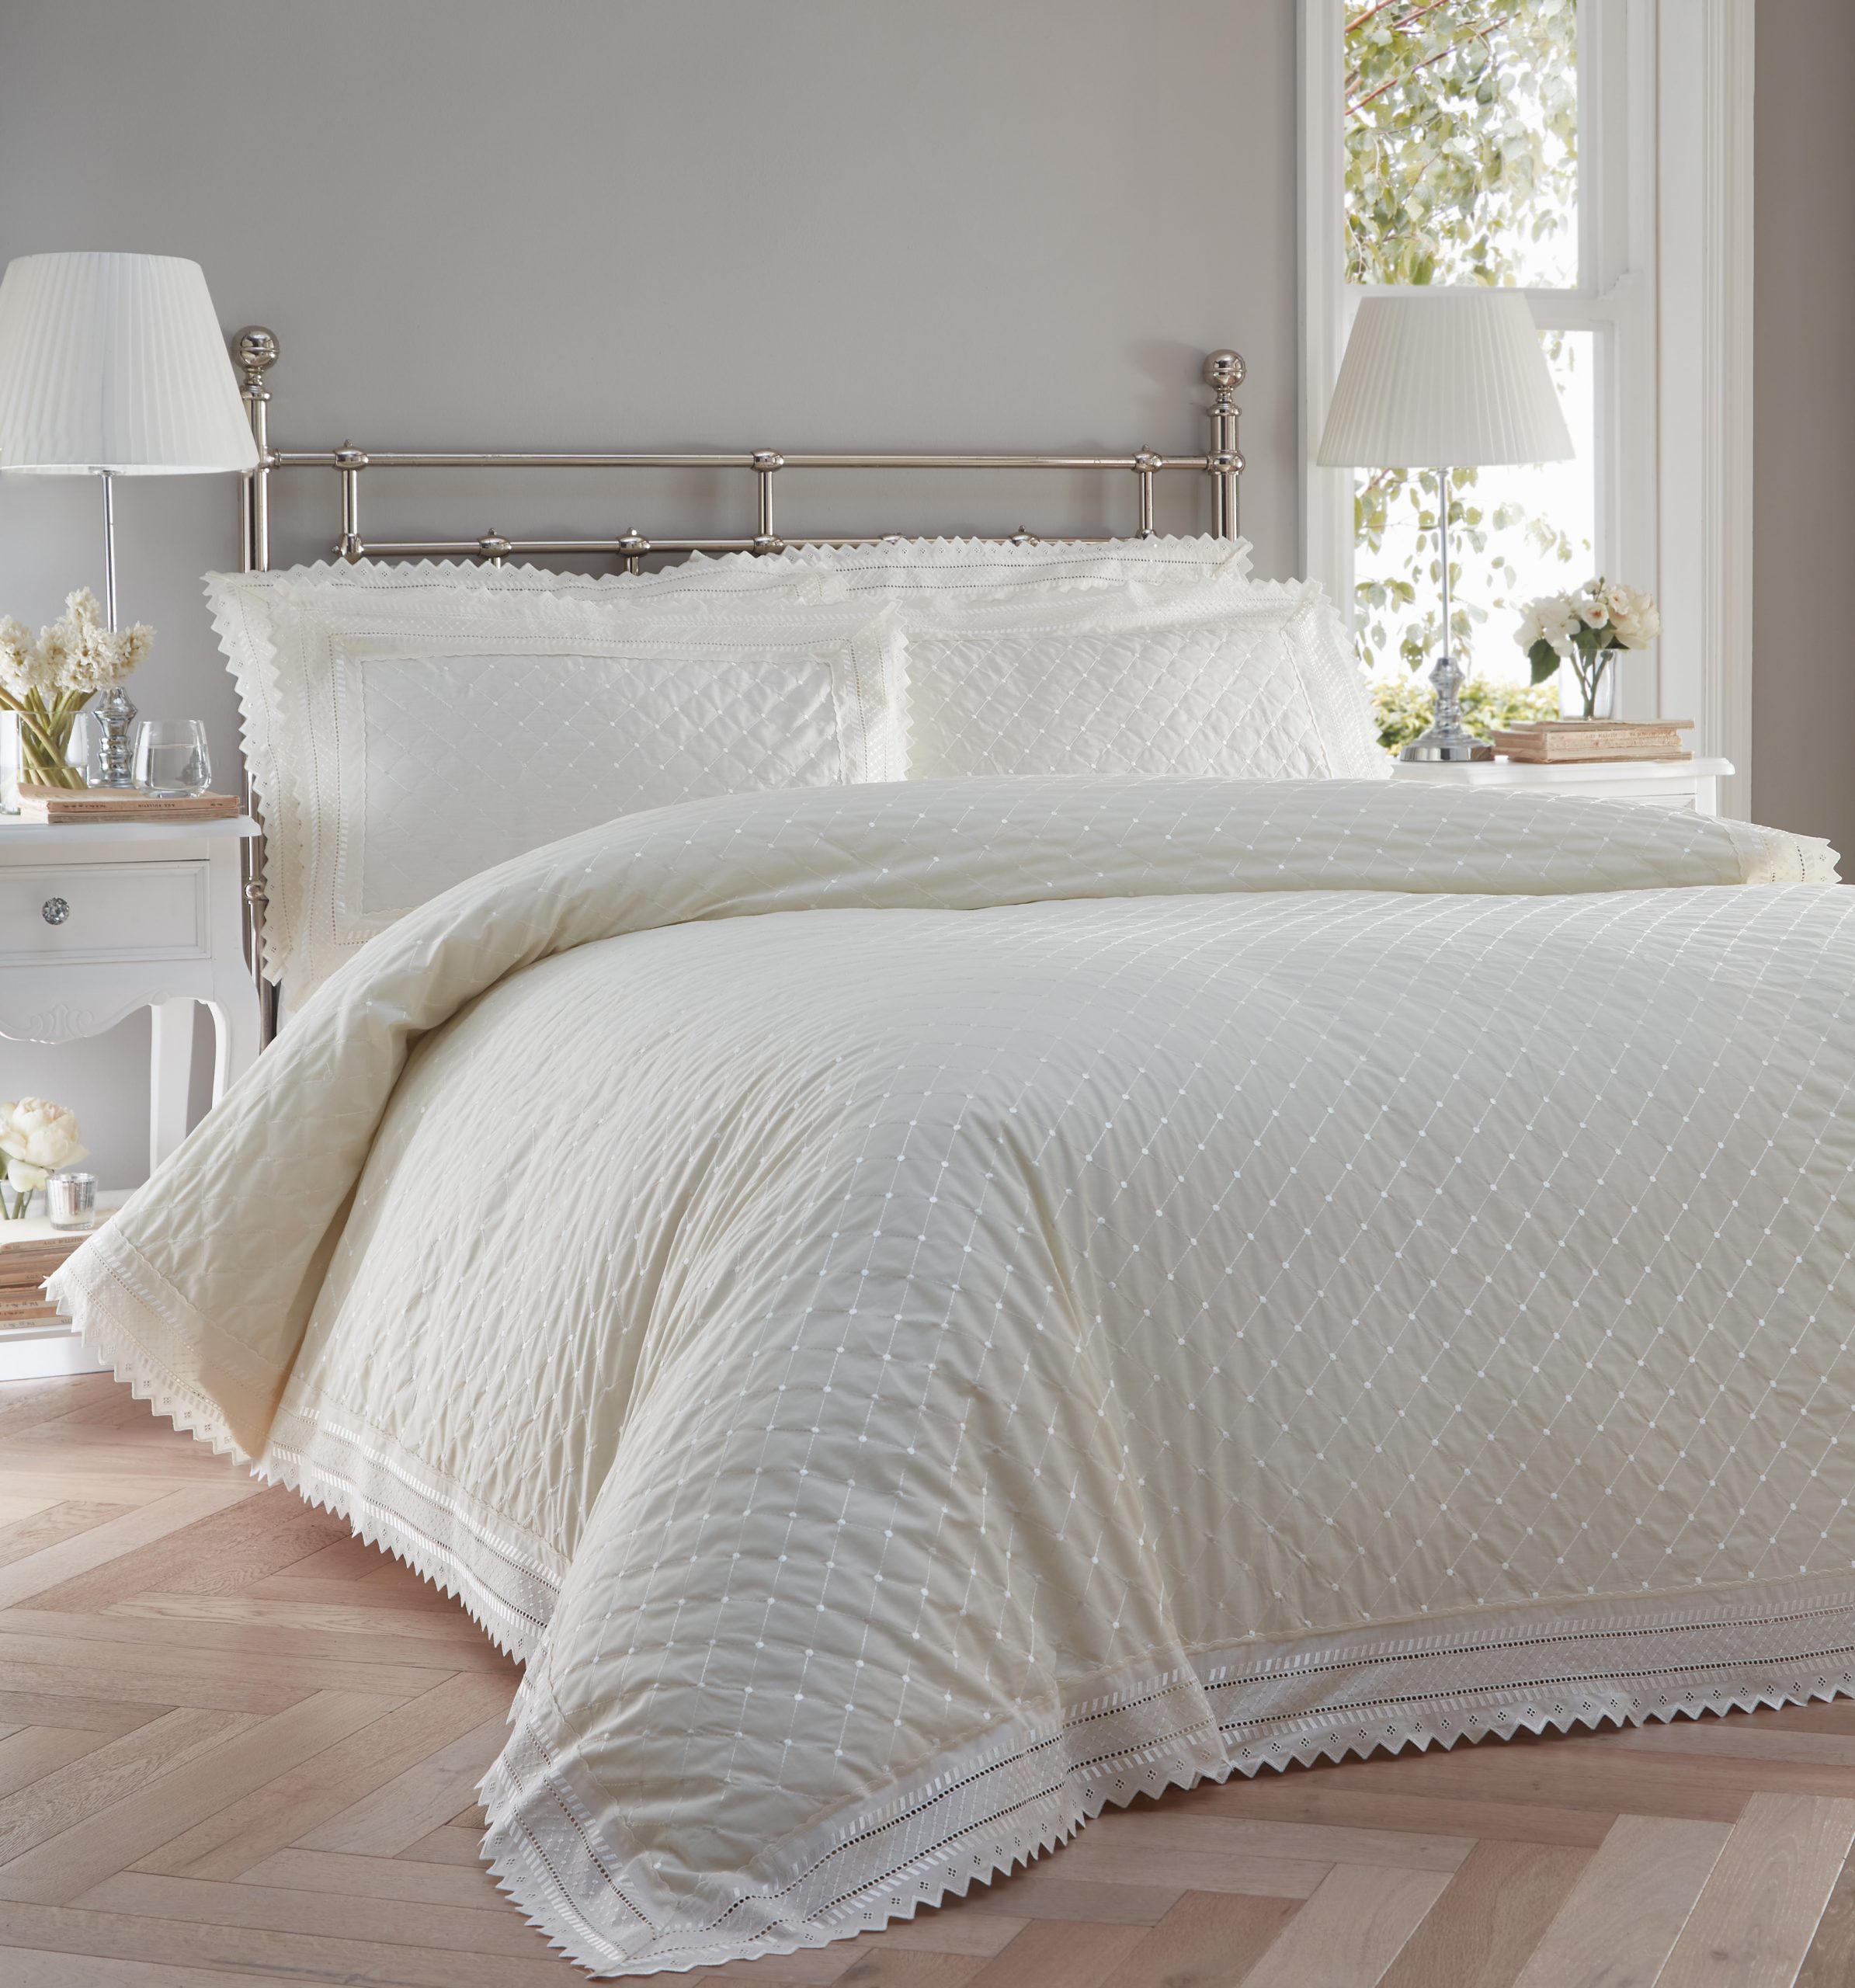 Broderie Anglaise Bedding Cream In, Cream Bedding King Set